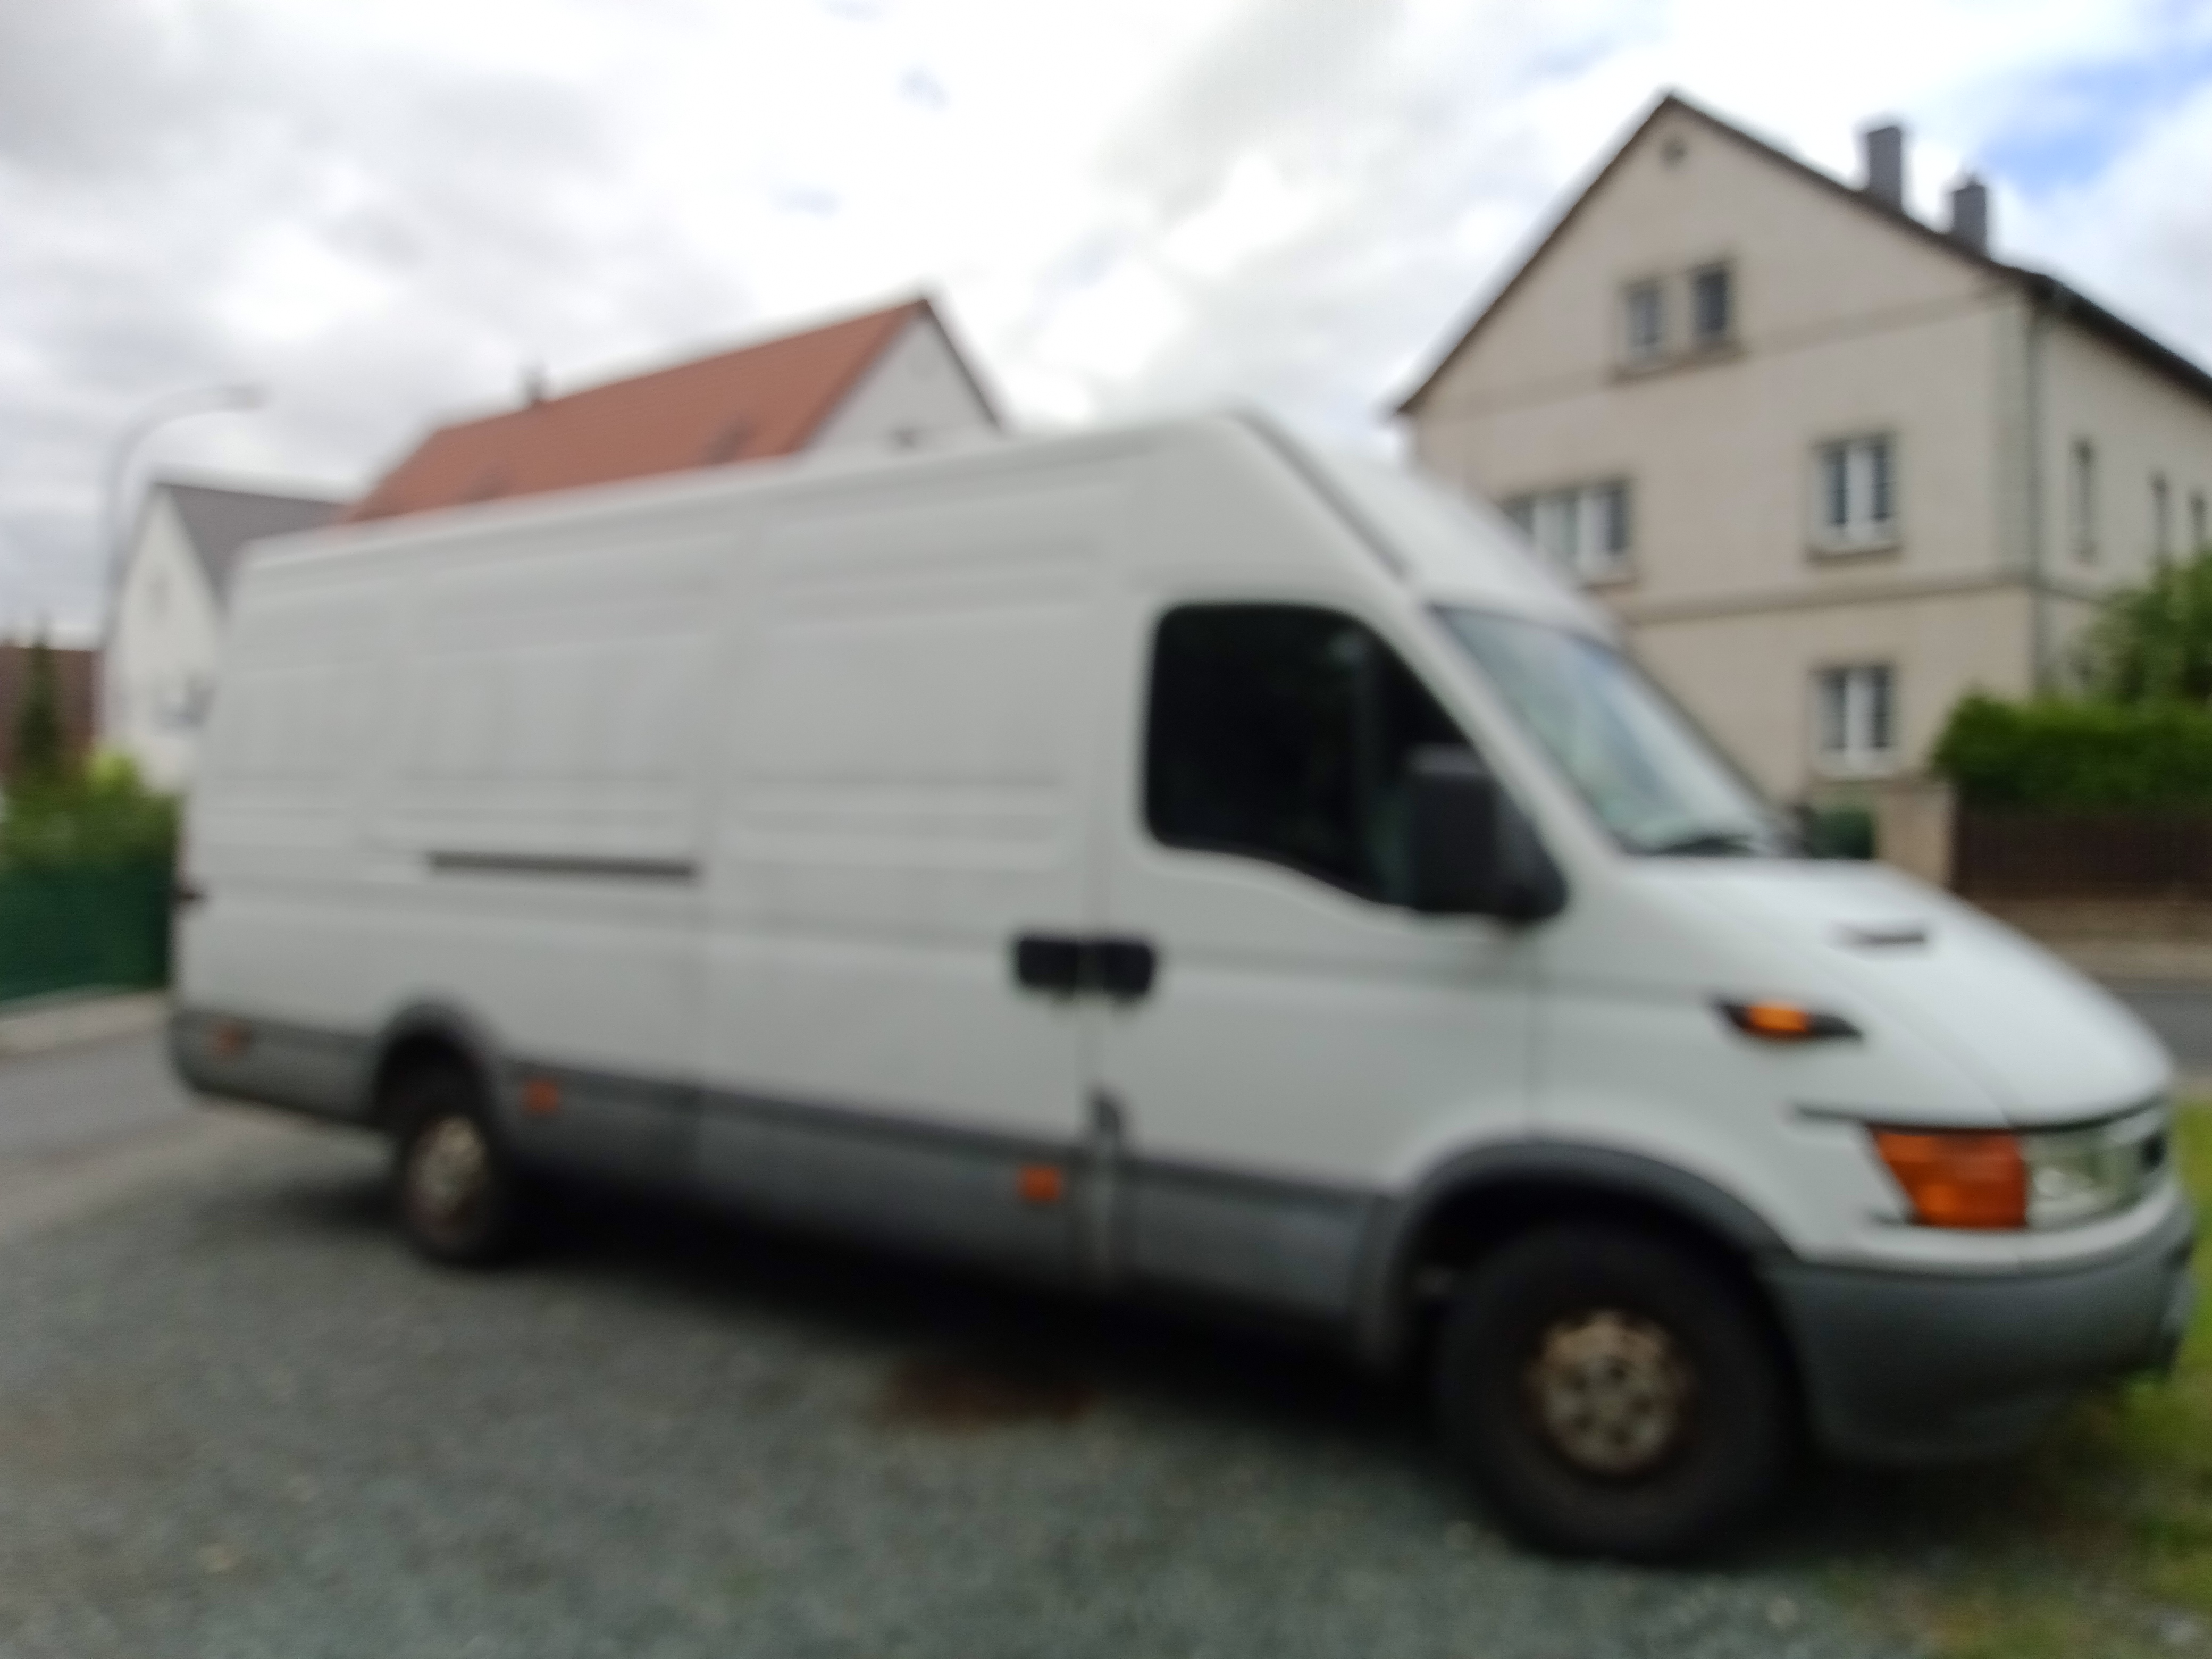 Relocation service in Leipzig, Germany | Europe Moving Company